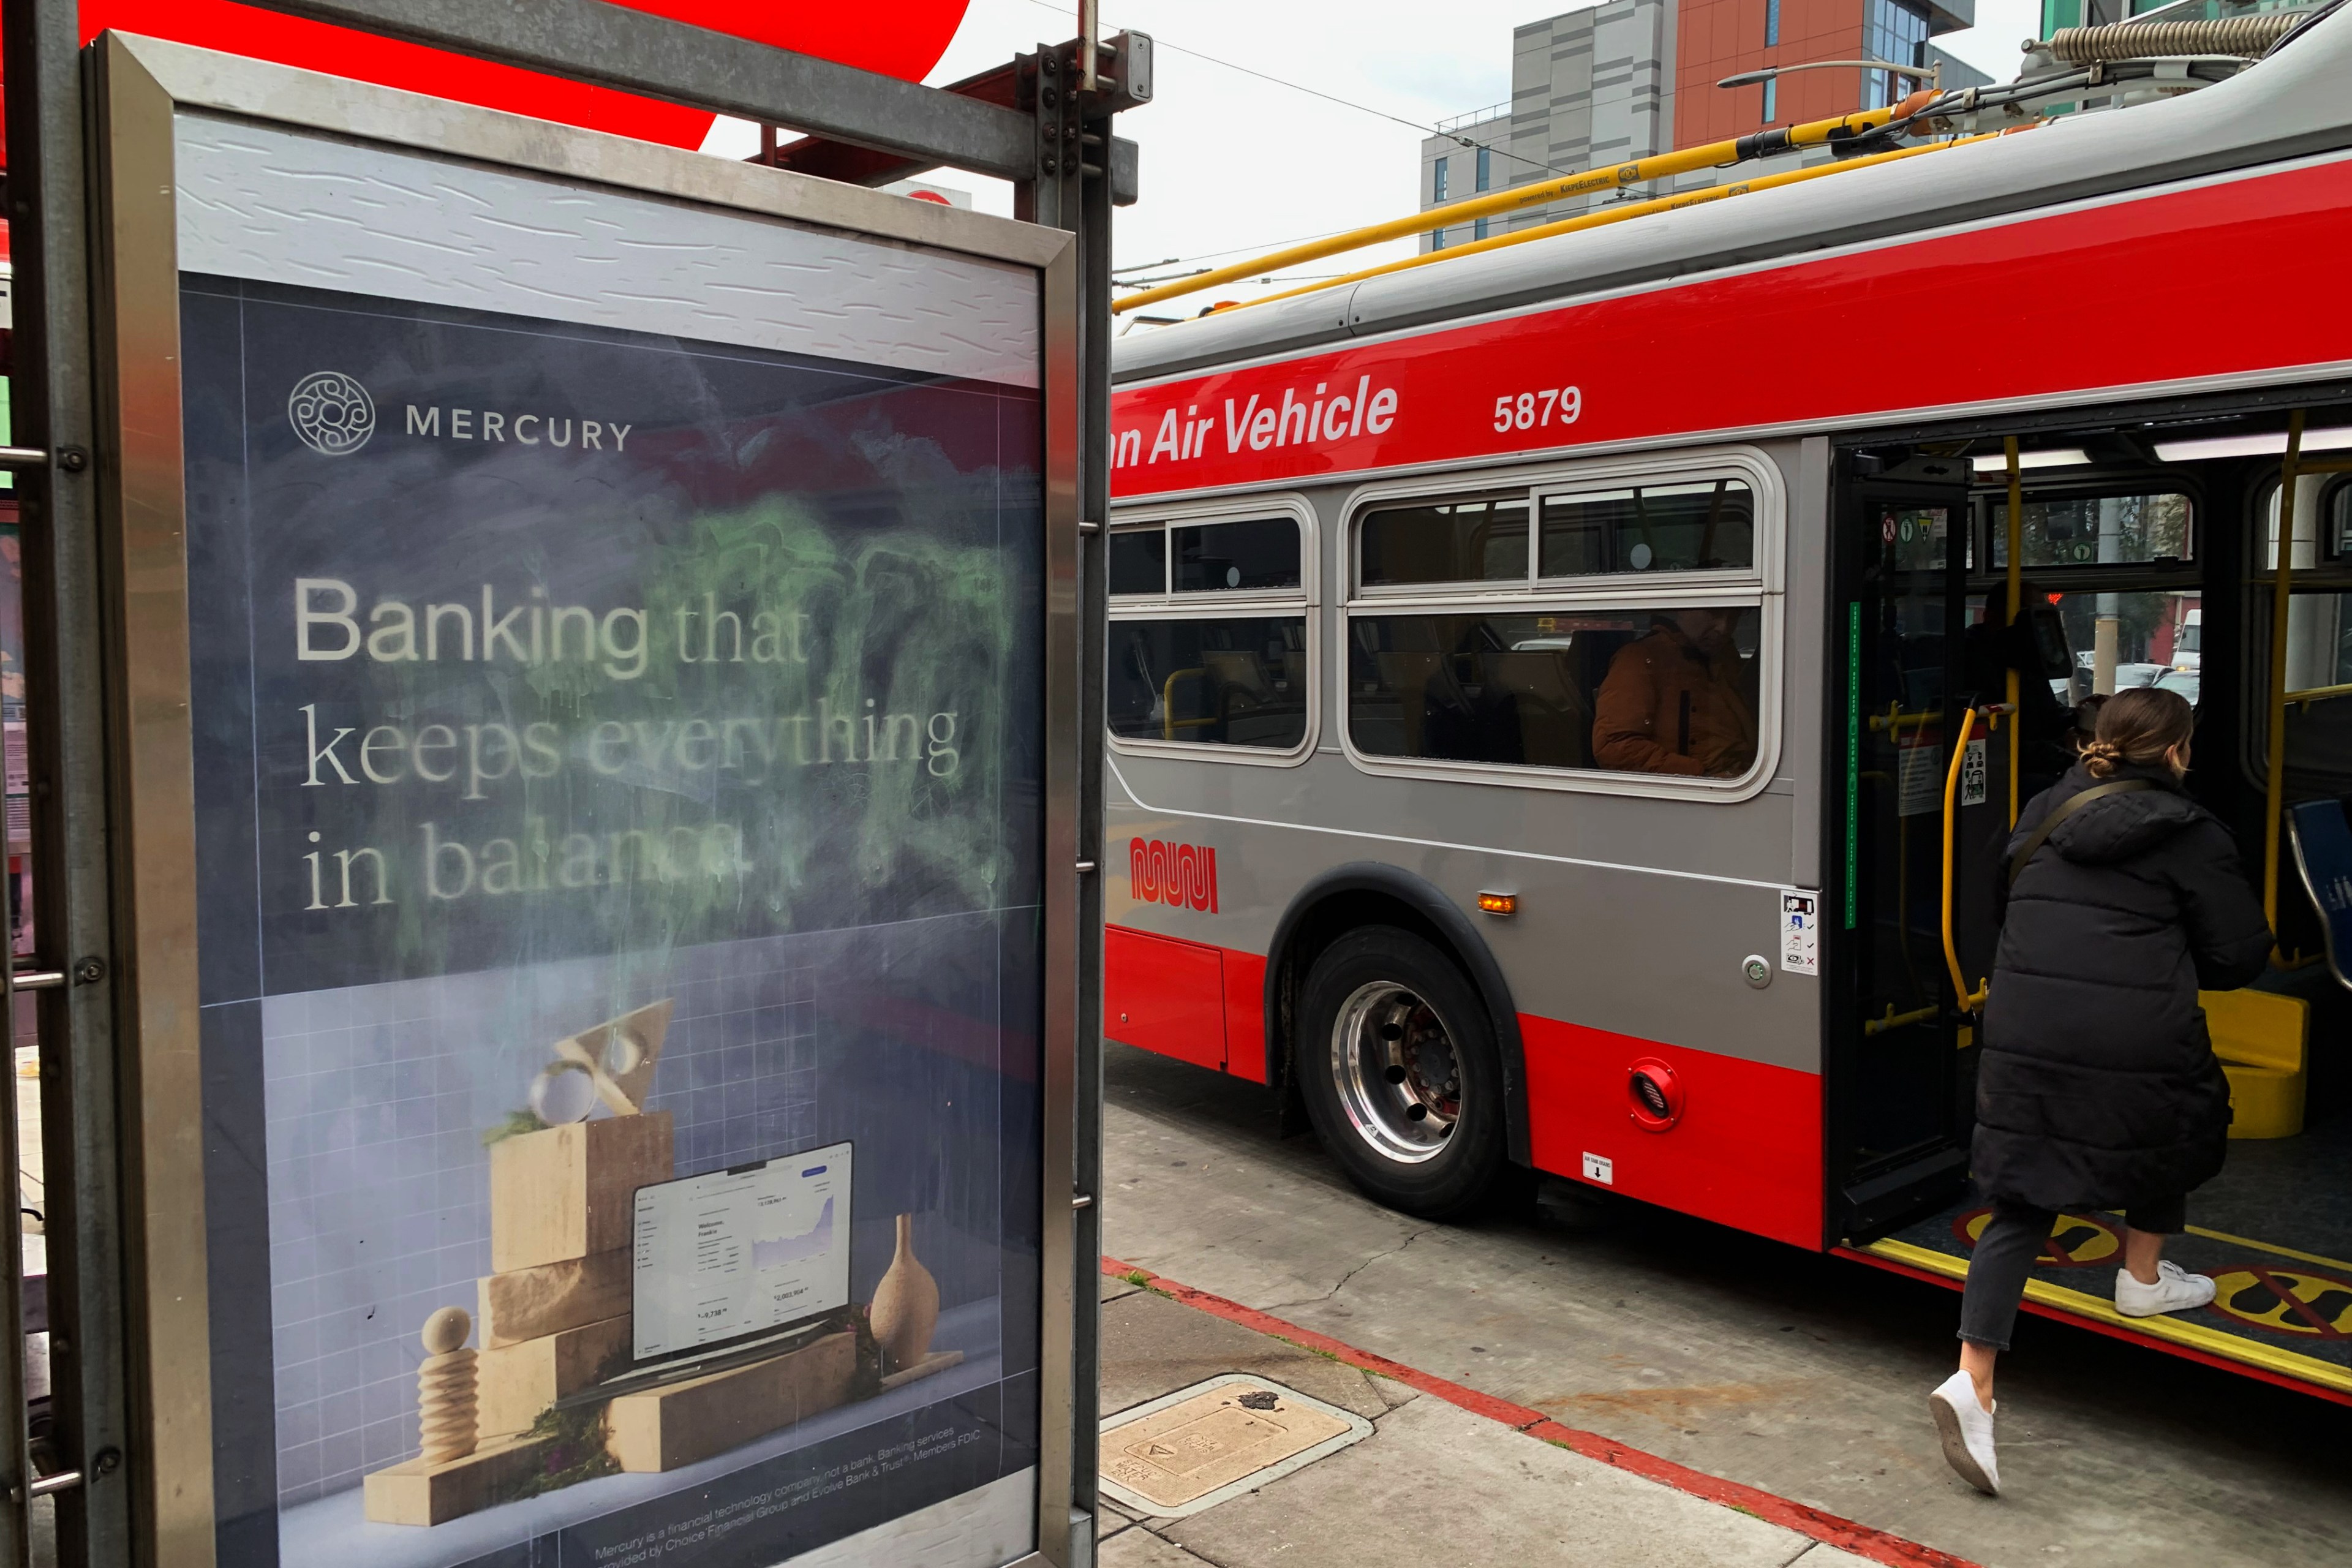 A bus stop ad for Mercury Banking next to a red and silver bus with a person boarding.